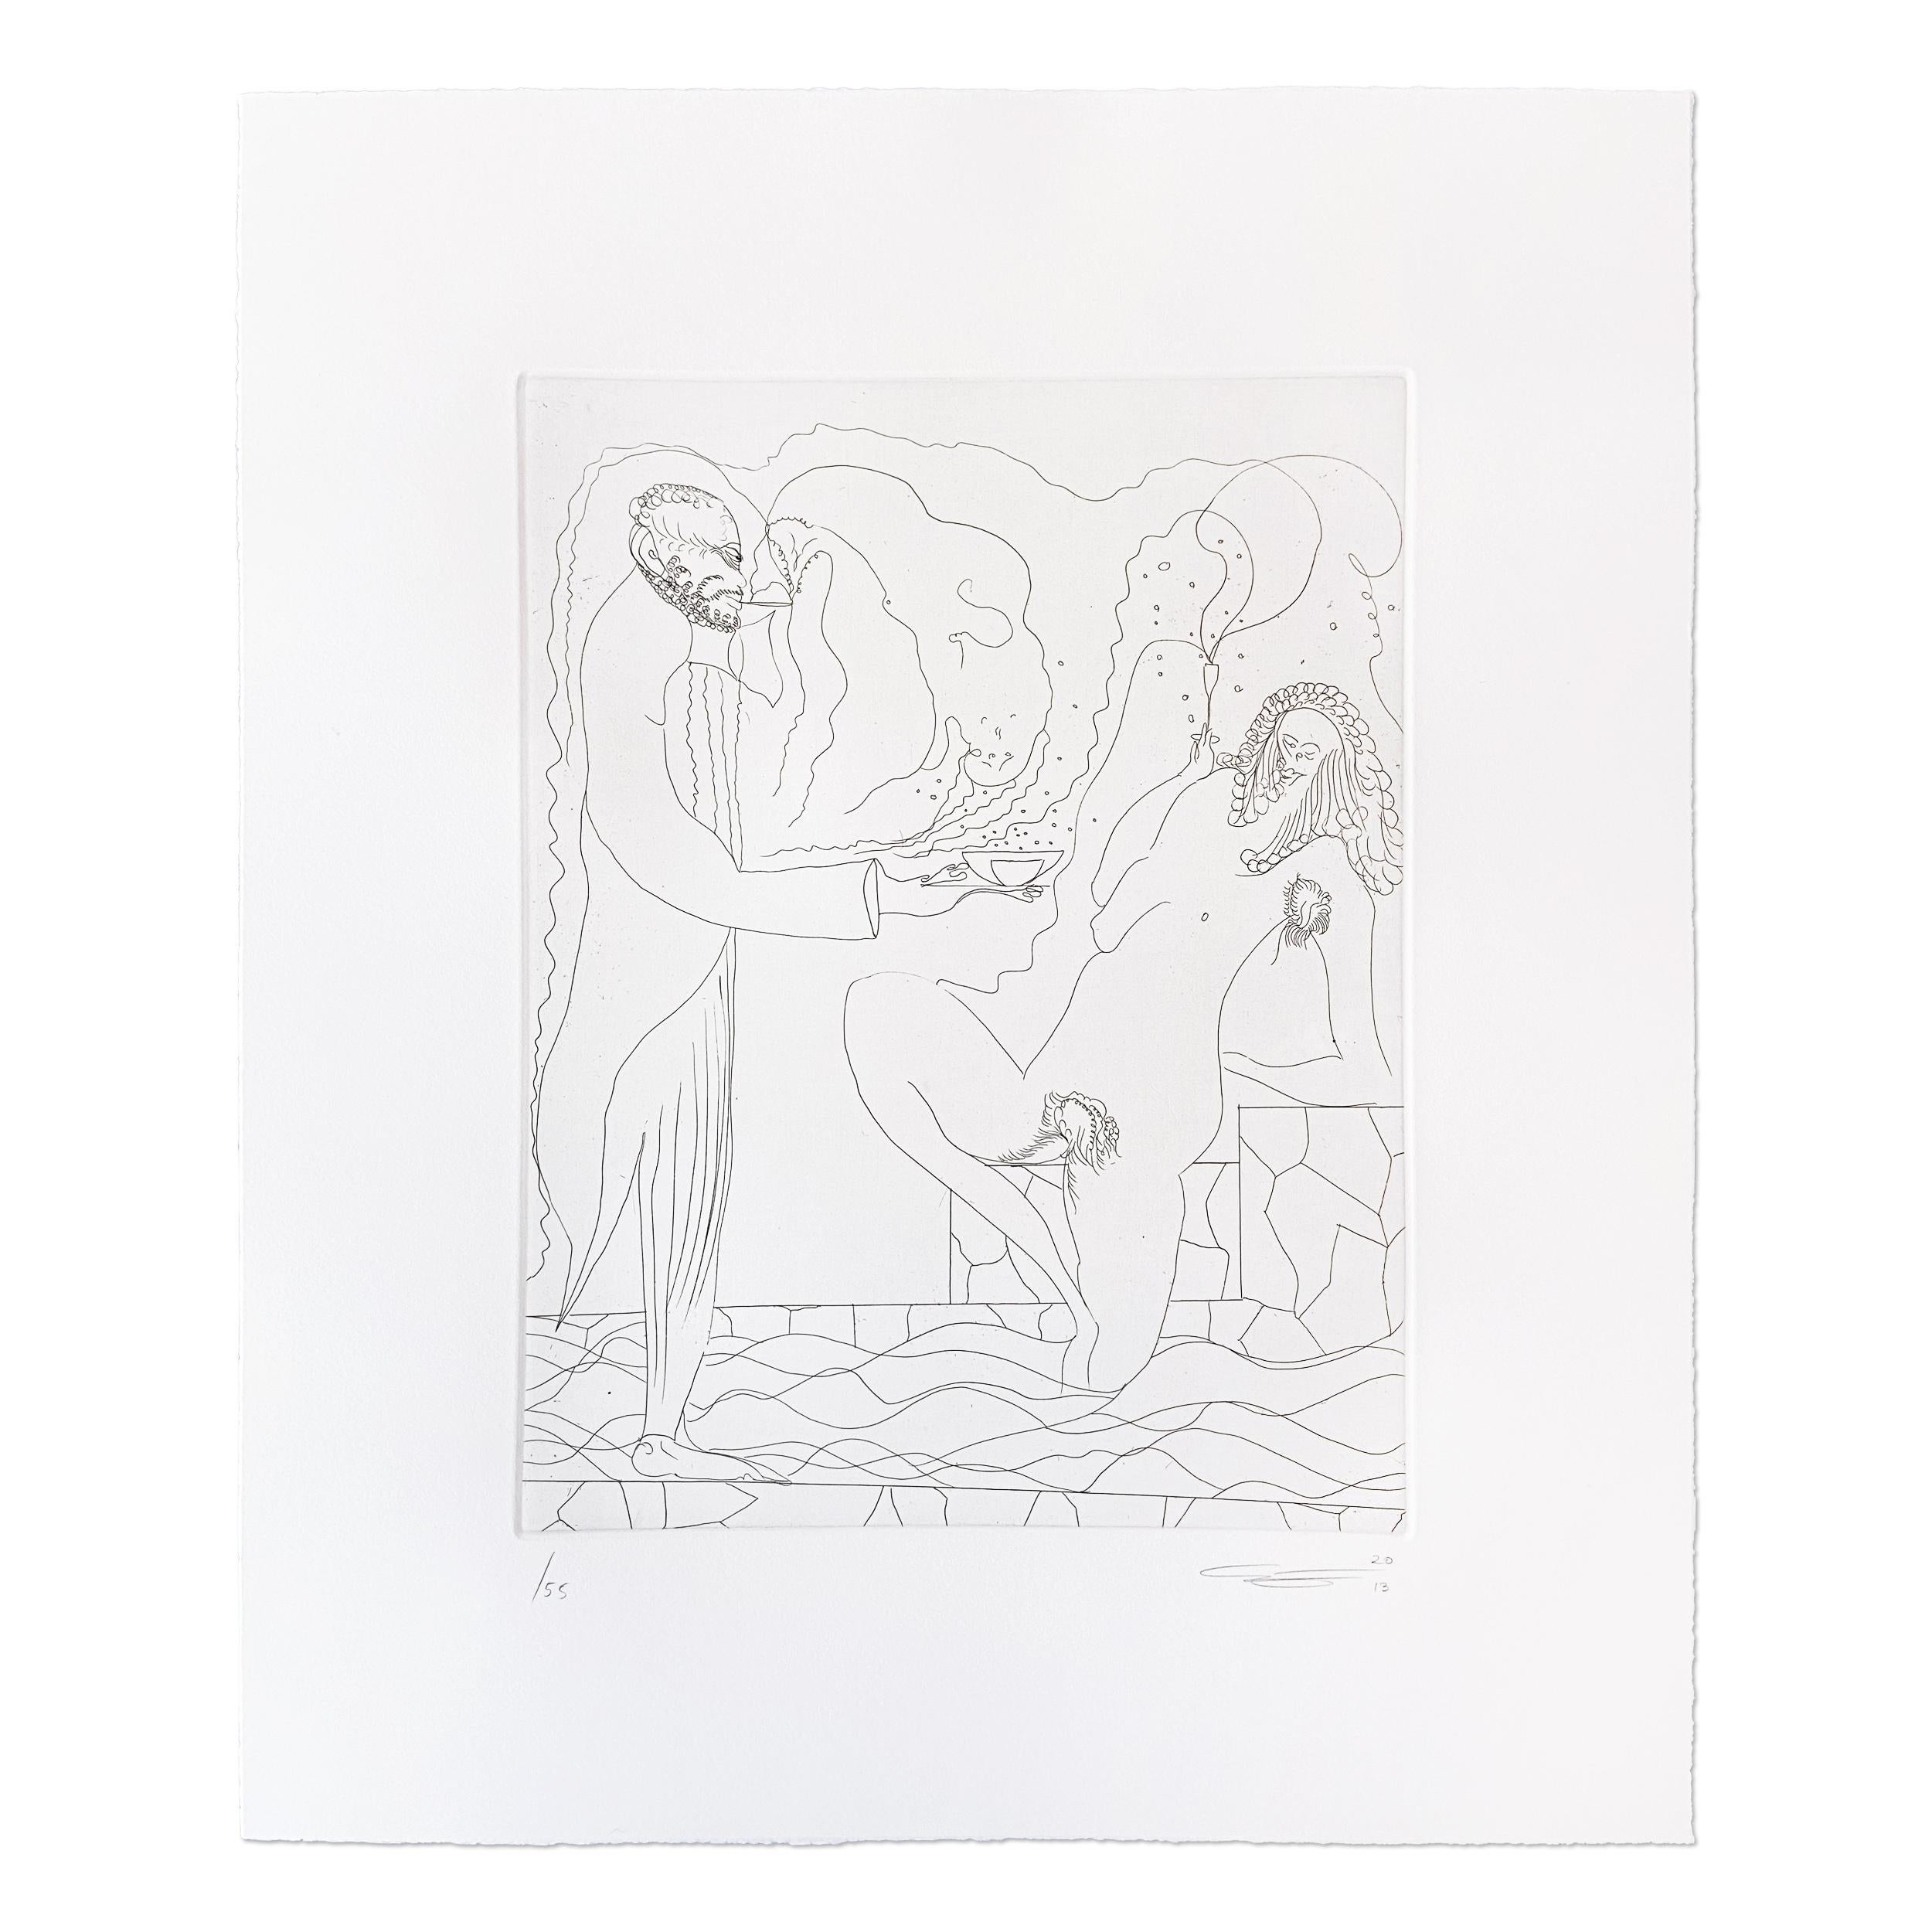 Chris Ofili (born 1968 in Manchester)
Poolside, 2013
Medium: Etching on wove paper
Dimensions: 45.1 x 35.6 cm (17.75 x 14 in)
Edition of 55: Hand signed and numbered
Condition: Mint